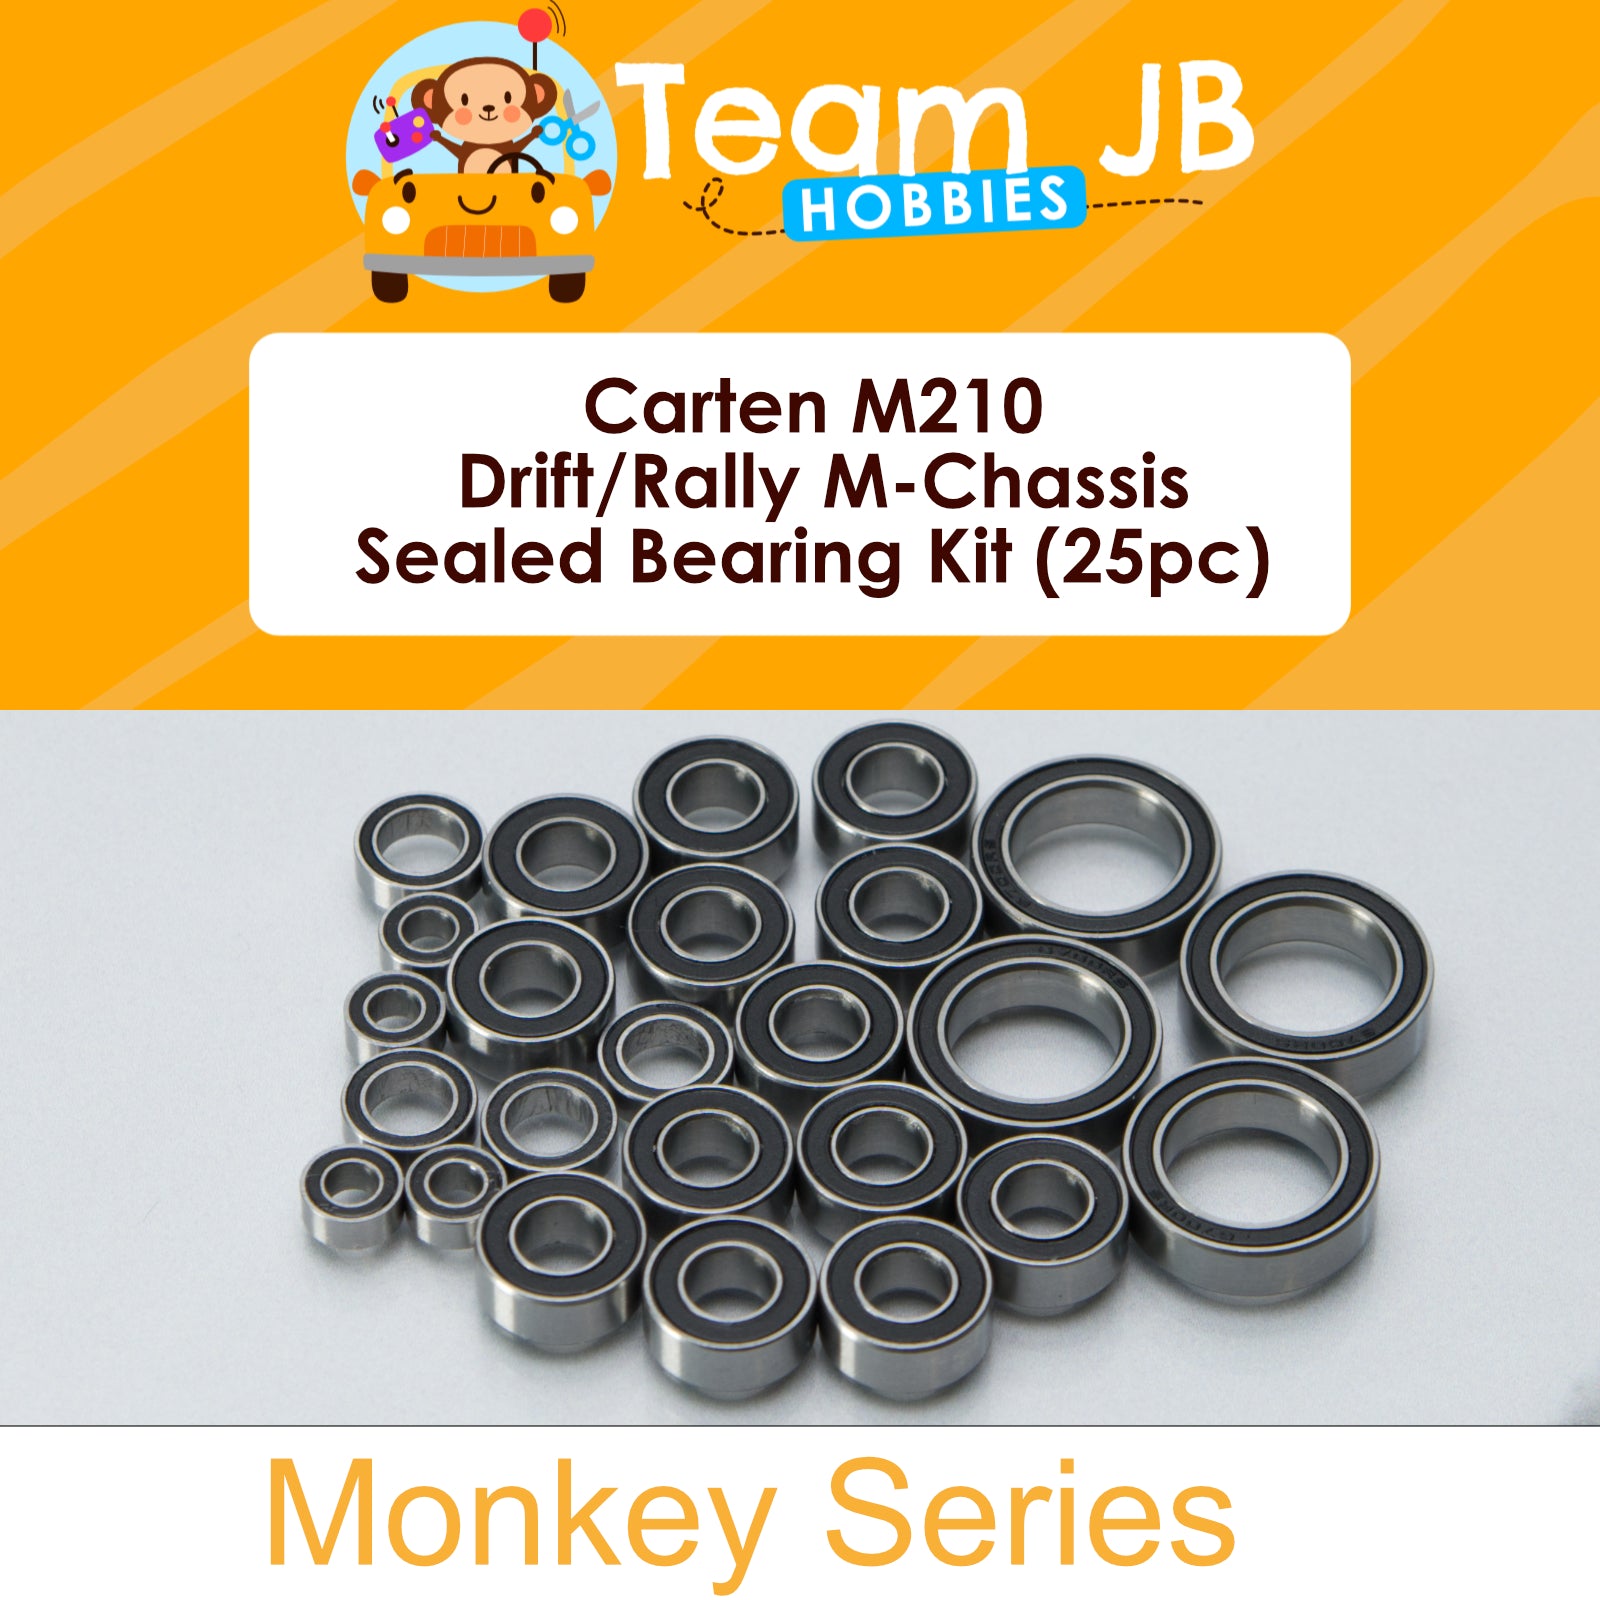 Carten M210 Drift M-Chassis RTR, M210 M-Chassis Kit, M210 Rally M-Chassis RTR - Sealed Bearing Kit